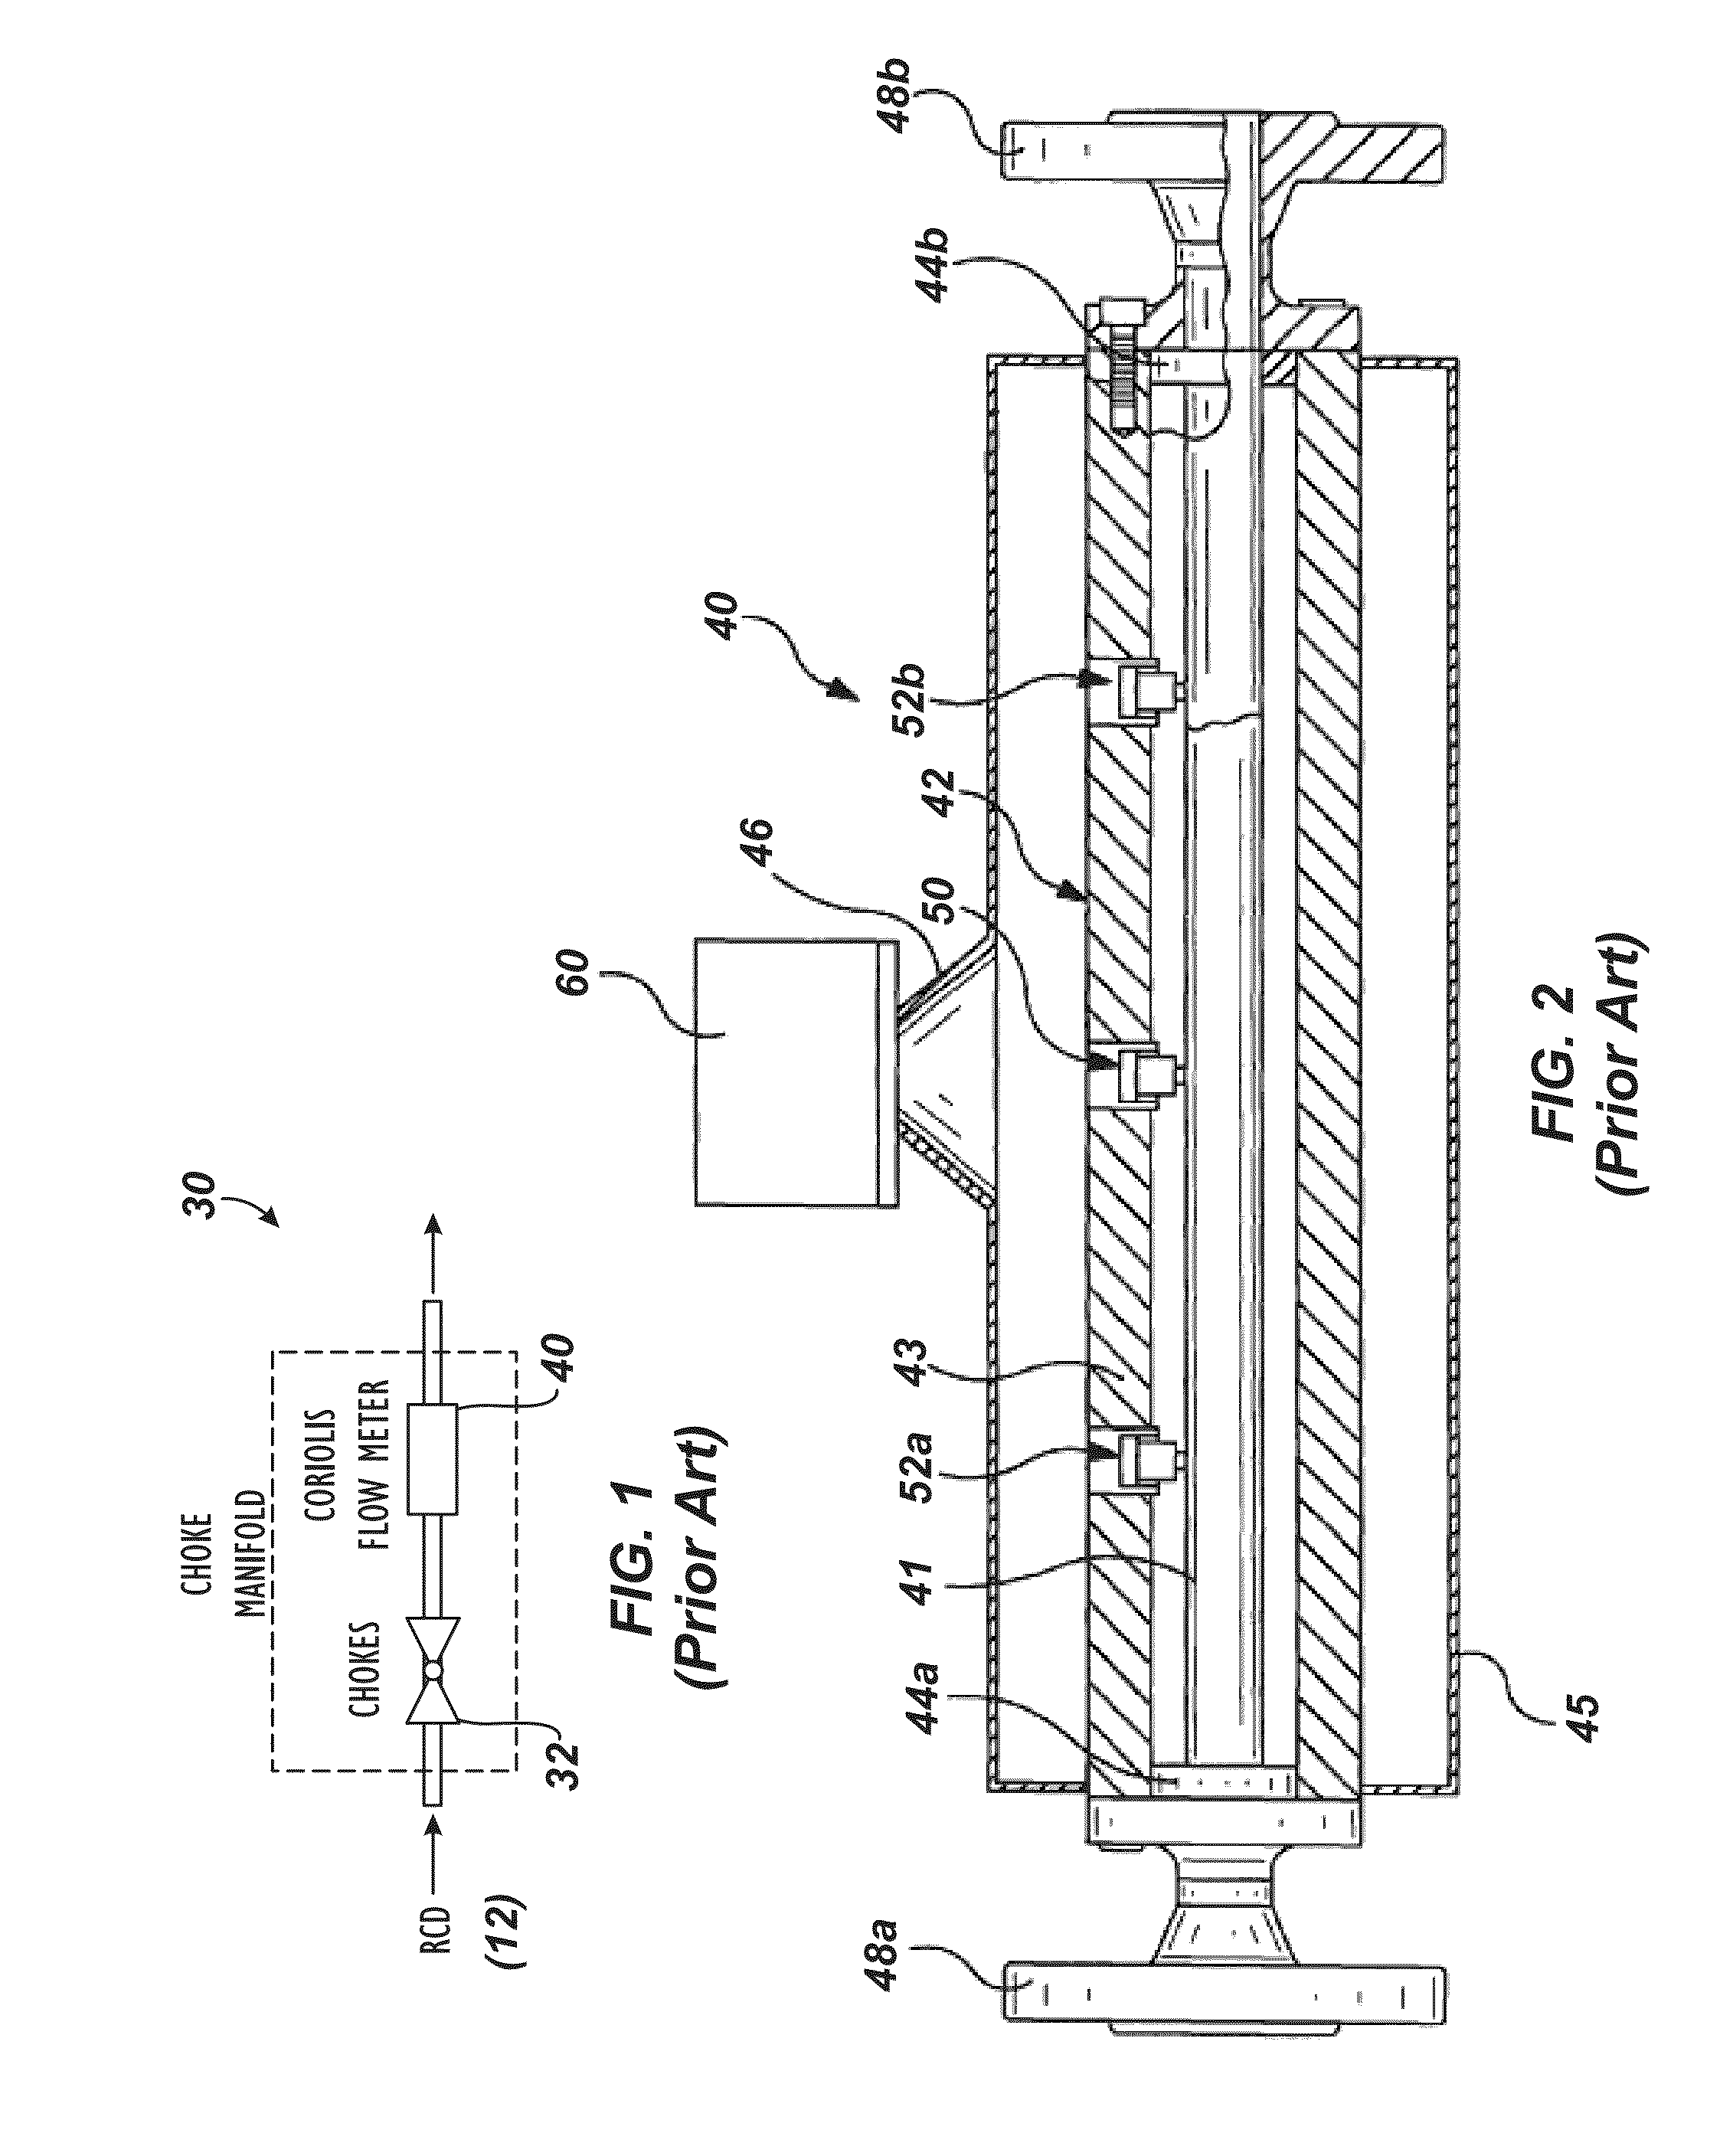 Coriolis Flow Meter Having Flow Tube with Equalized Pressure Differential